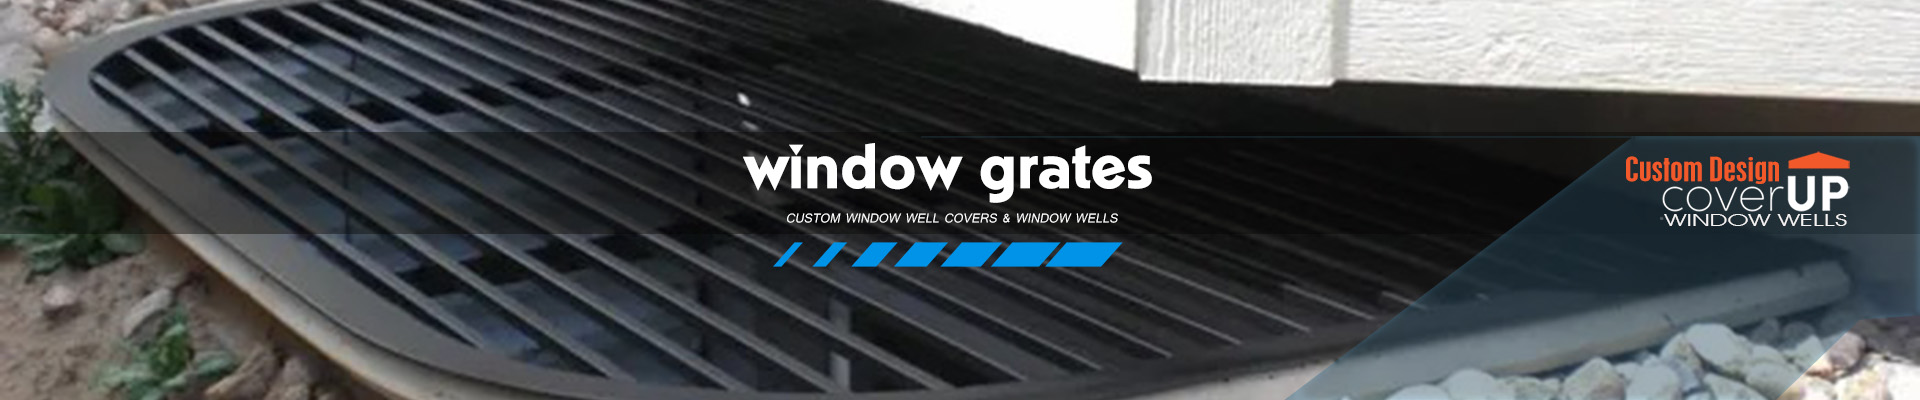 Window Grates Company Cover Up